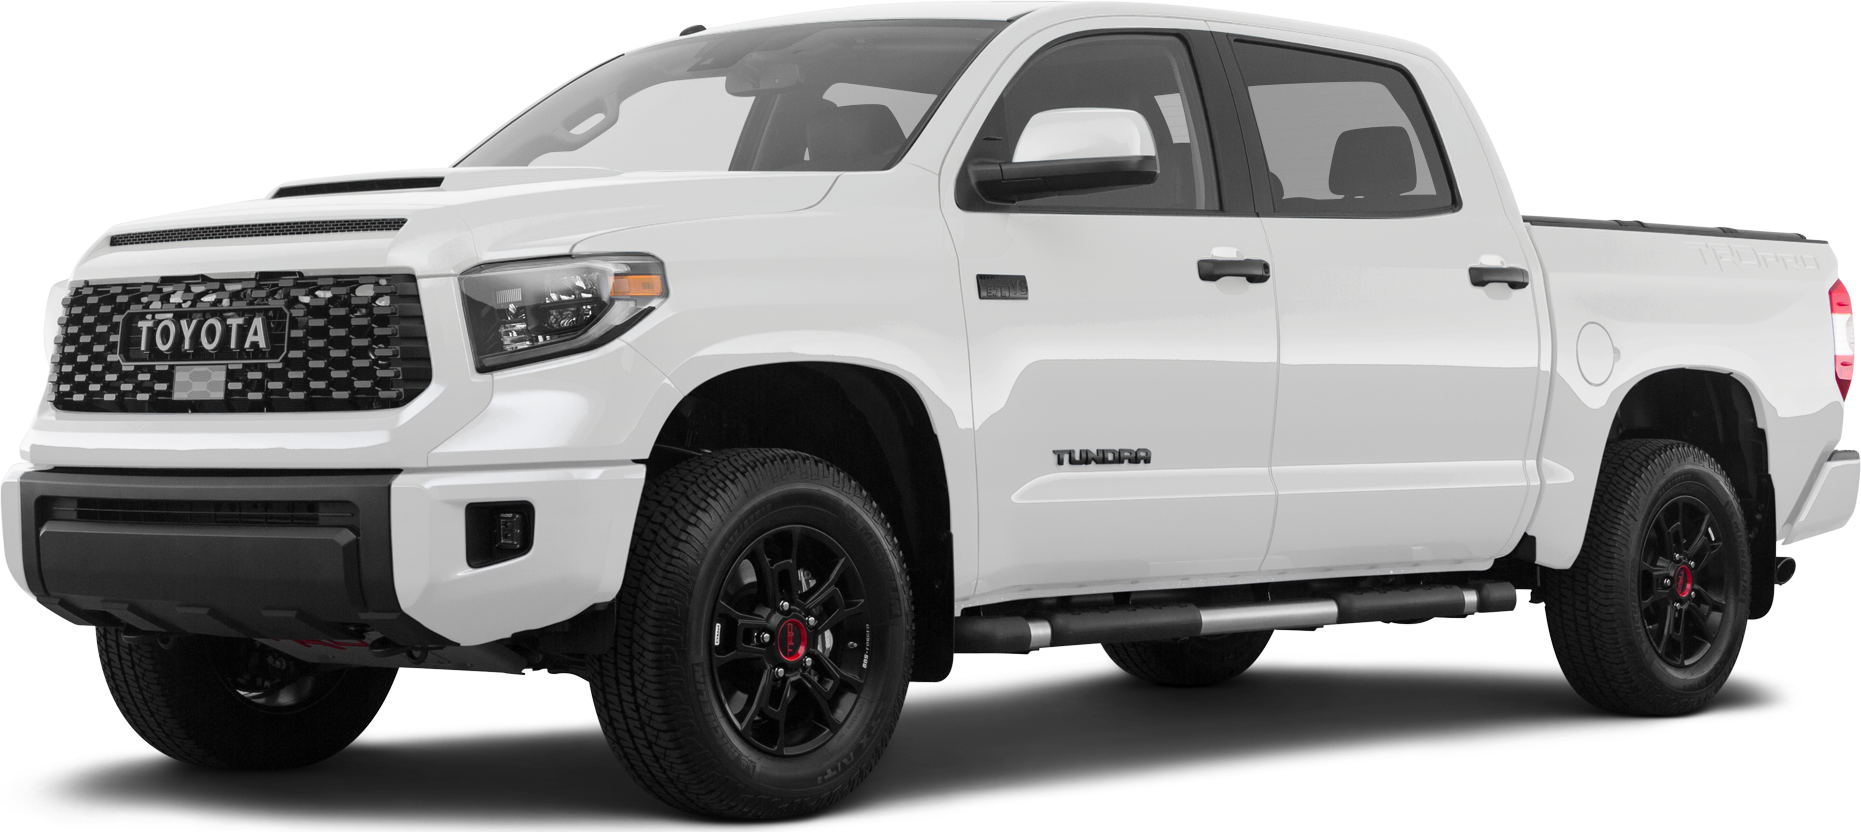 2020 Toyota Tundra Values And Cars For Sale Kelley Blue Book